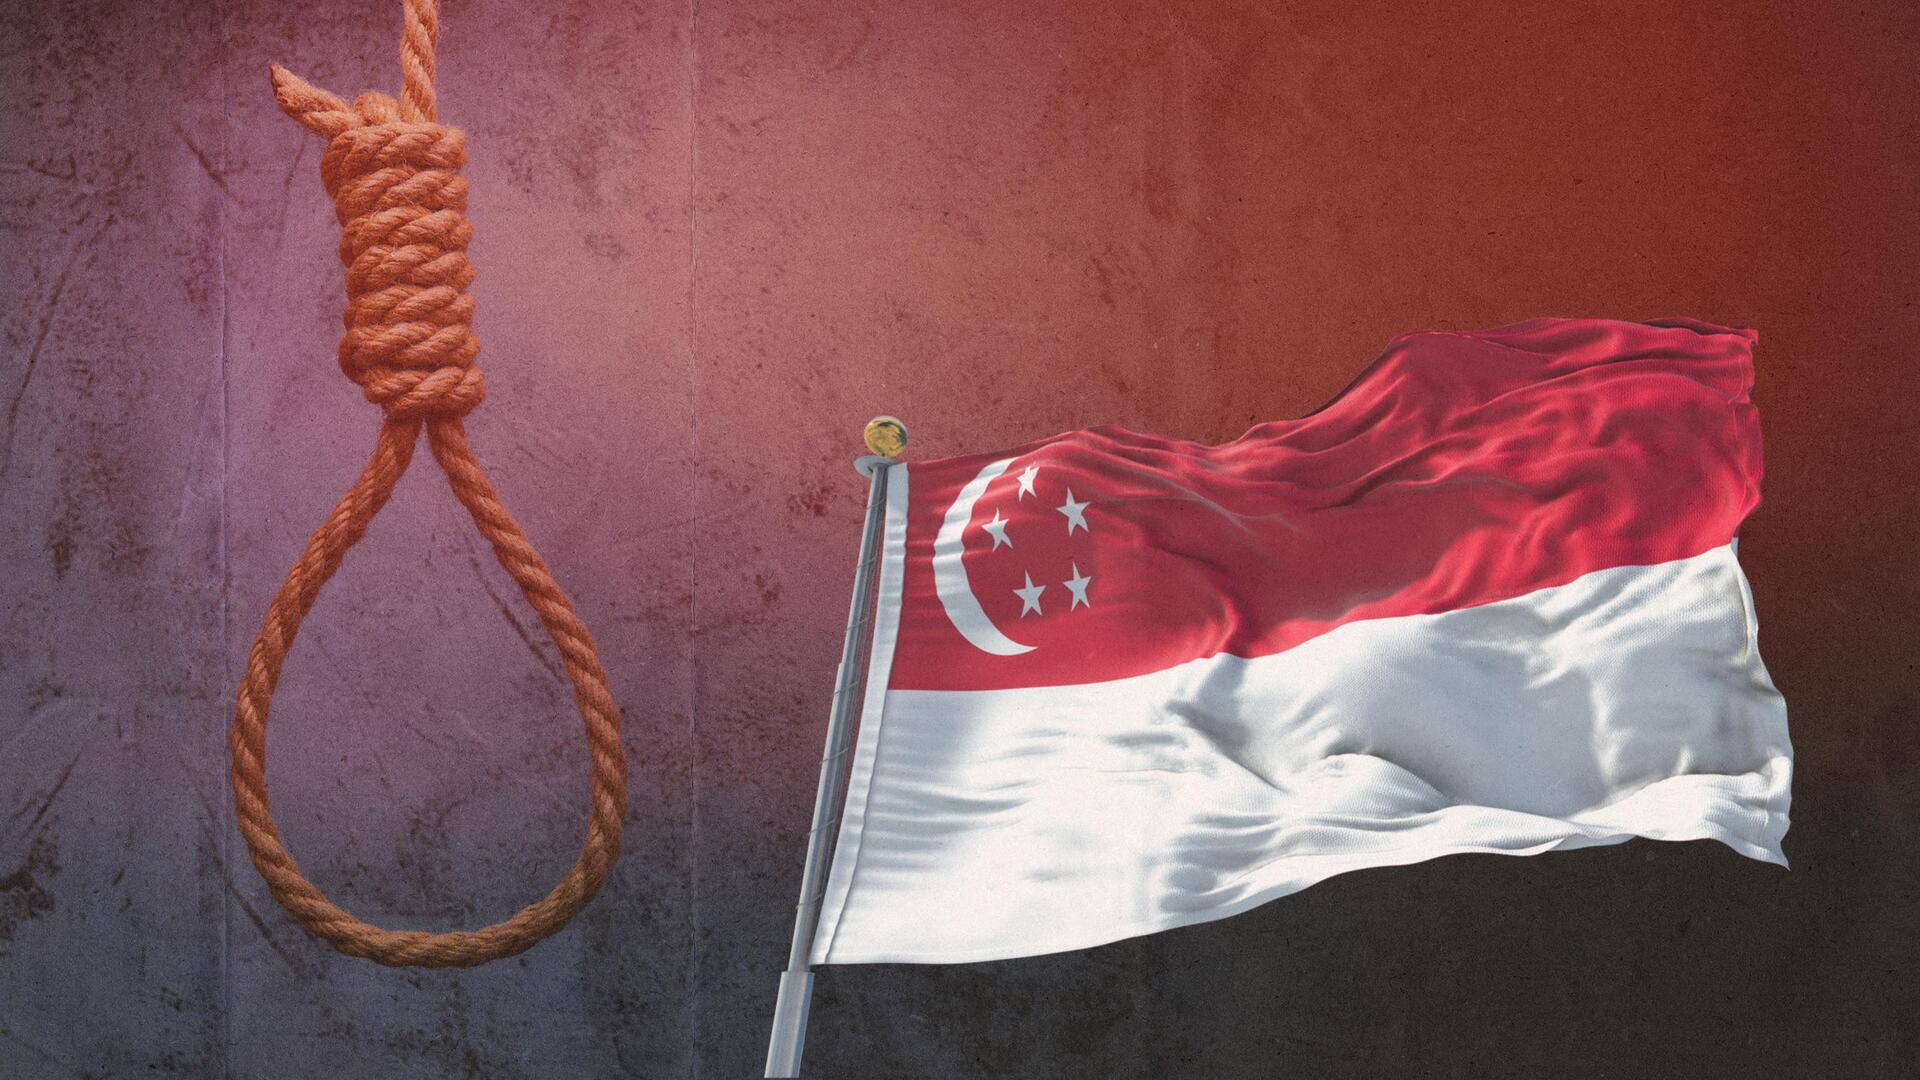 Singapore to execute first woman in 20 years